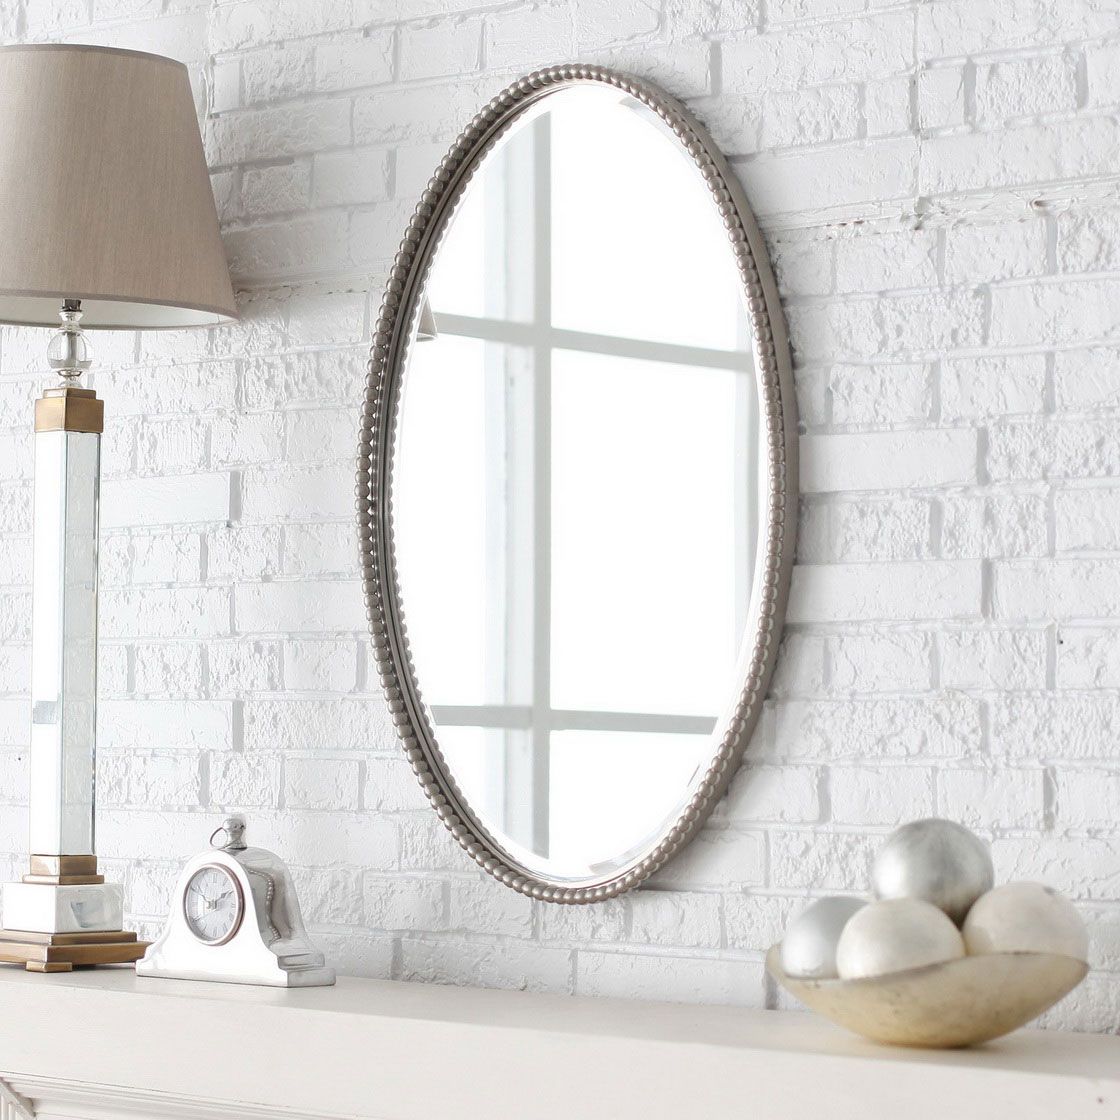 Most Popular Ansprechend Large Wall Mirrors Nz Square For Full La Intended For Oval Bathroom Wall Mirrors (View 6 of 20)